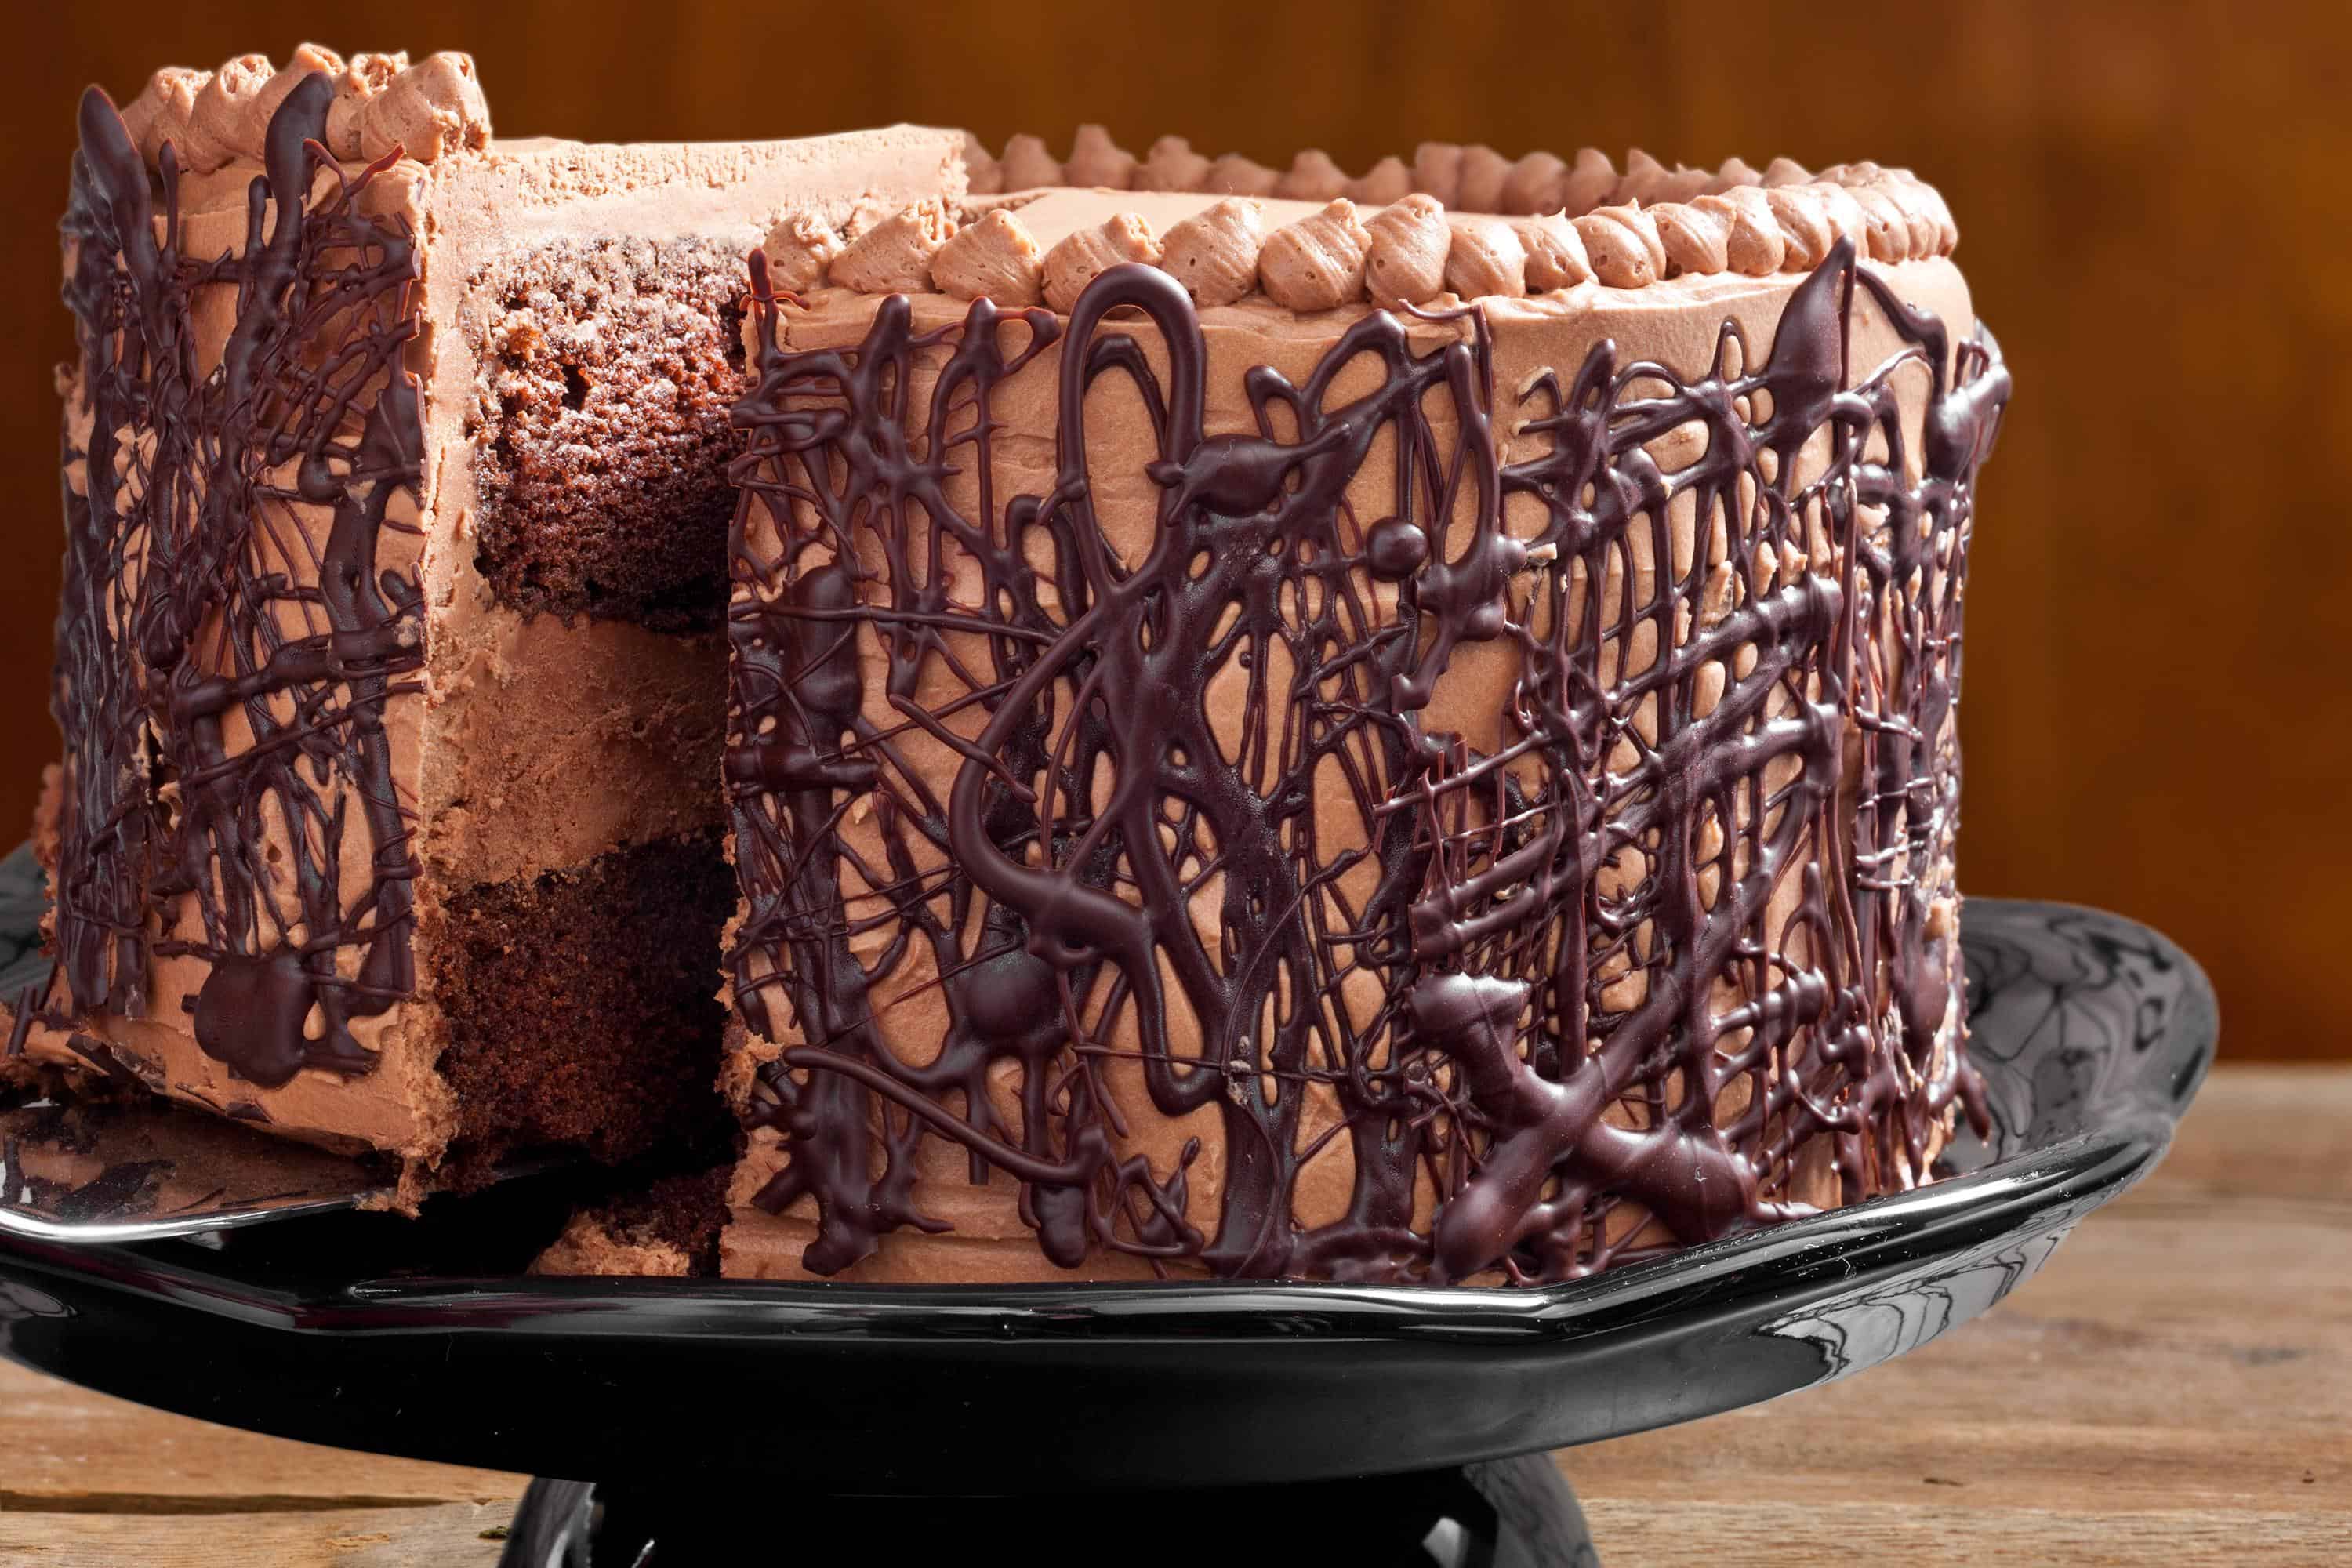 Chocolate cake with whipped fudge filling and chocolate buttercream